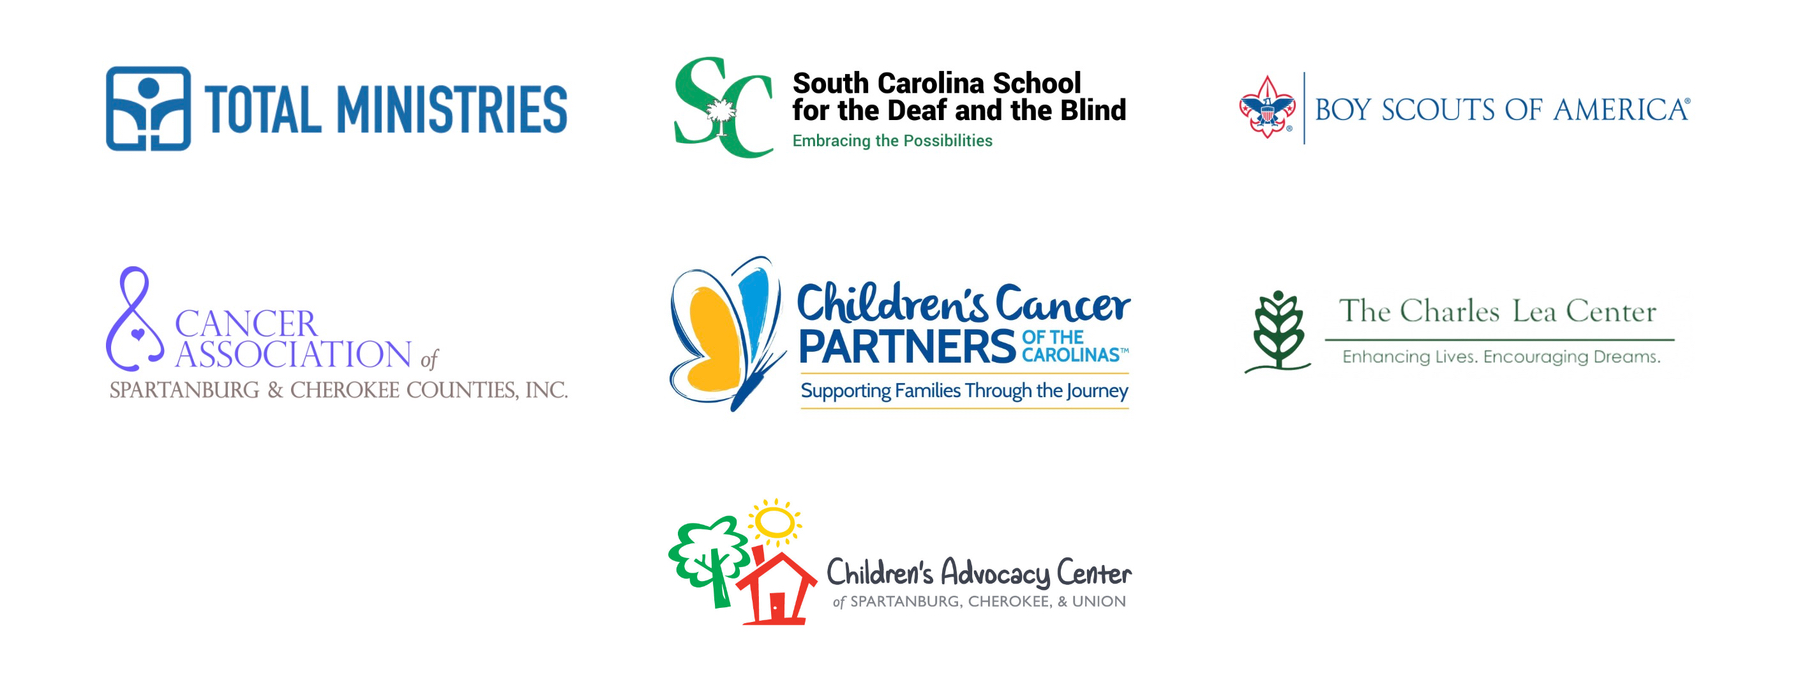 Charities Spartan Waste sponsors or supports: Total Ministries, South Carolina School for the Deaf and the Blind, Boy Scouts of America, Cancer Association of Spartanburg and Cherokee Counties, Children's Cancer Partners of The Carolinas, The Charles Lea Center, and The Children's Advocacy Center of Spartanburg, Cherokee, and Union County.